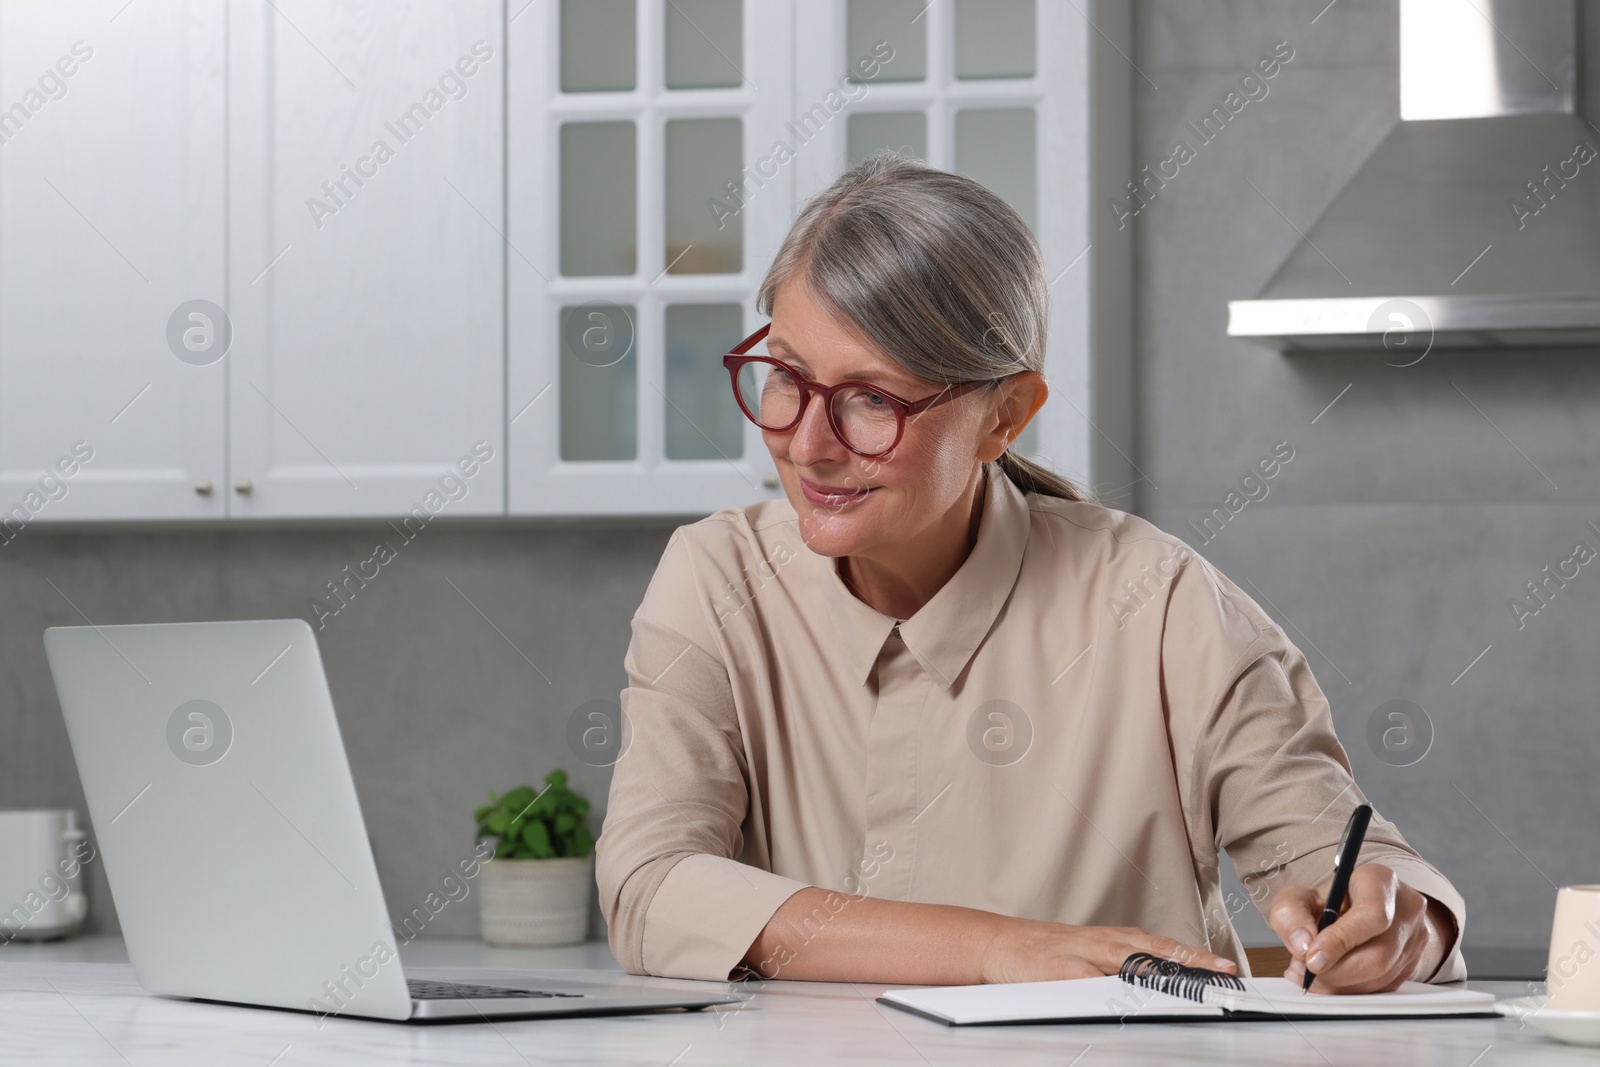 Photo of Beautiful senior woman taking notes while using laptop at white marble table in kitchen